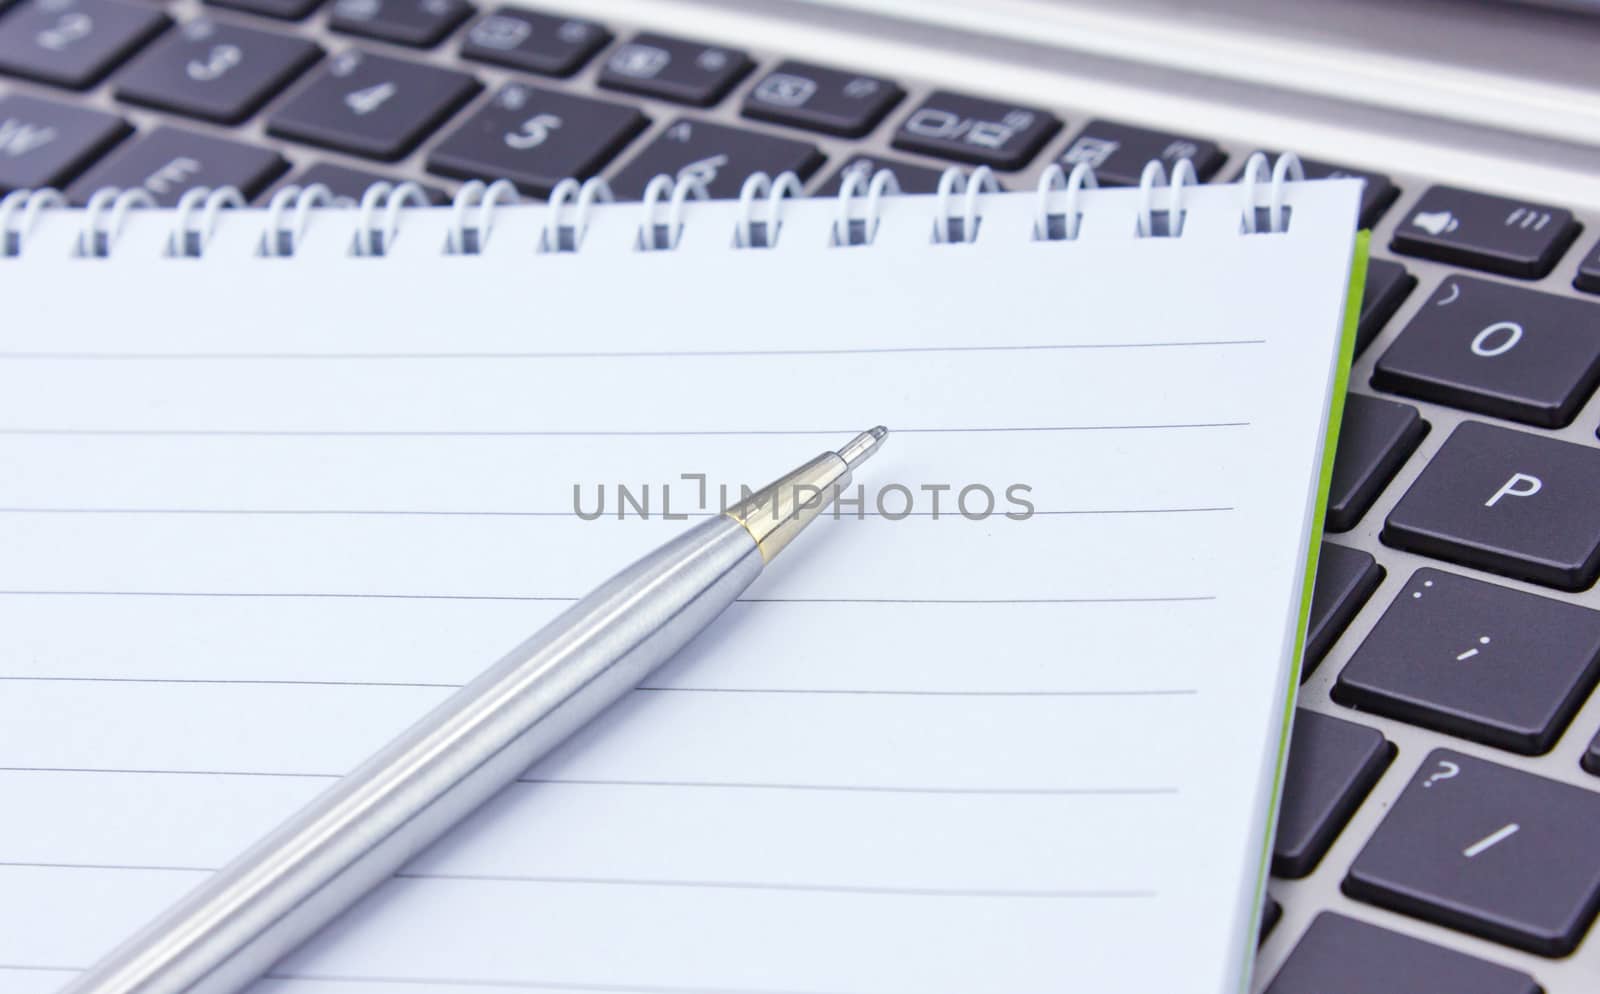 a notebook and pen lie on the keyboard of computer